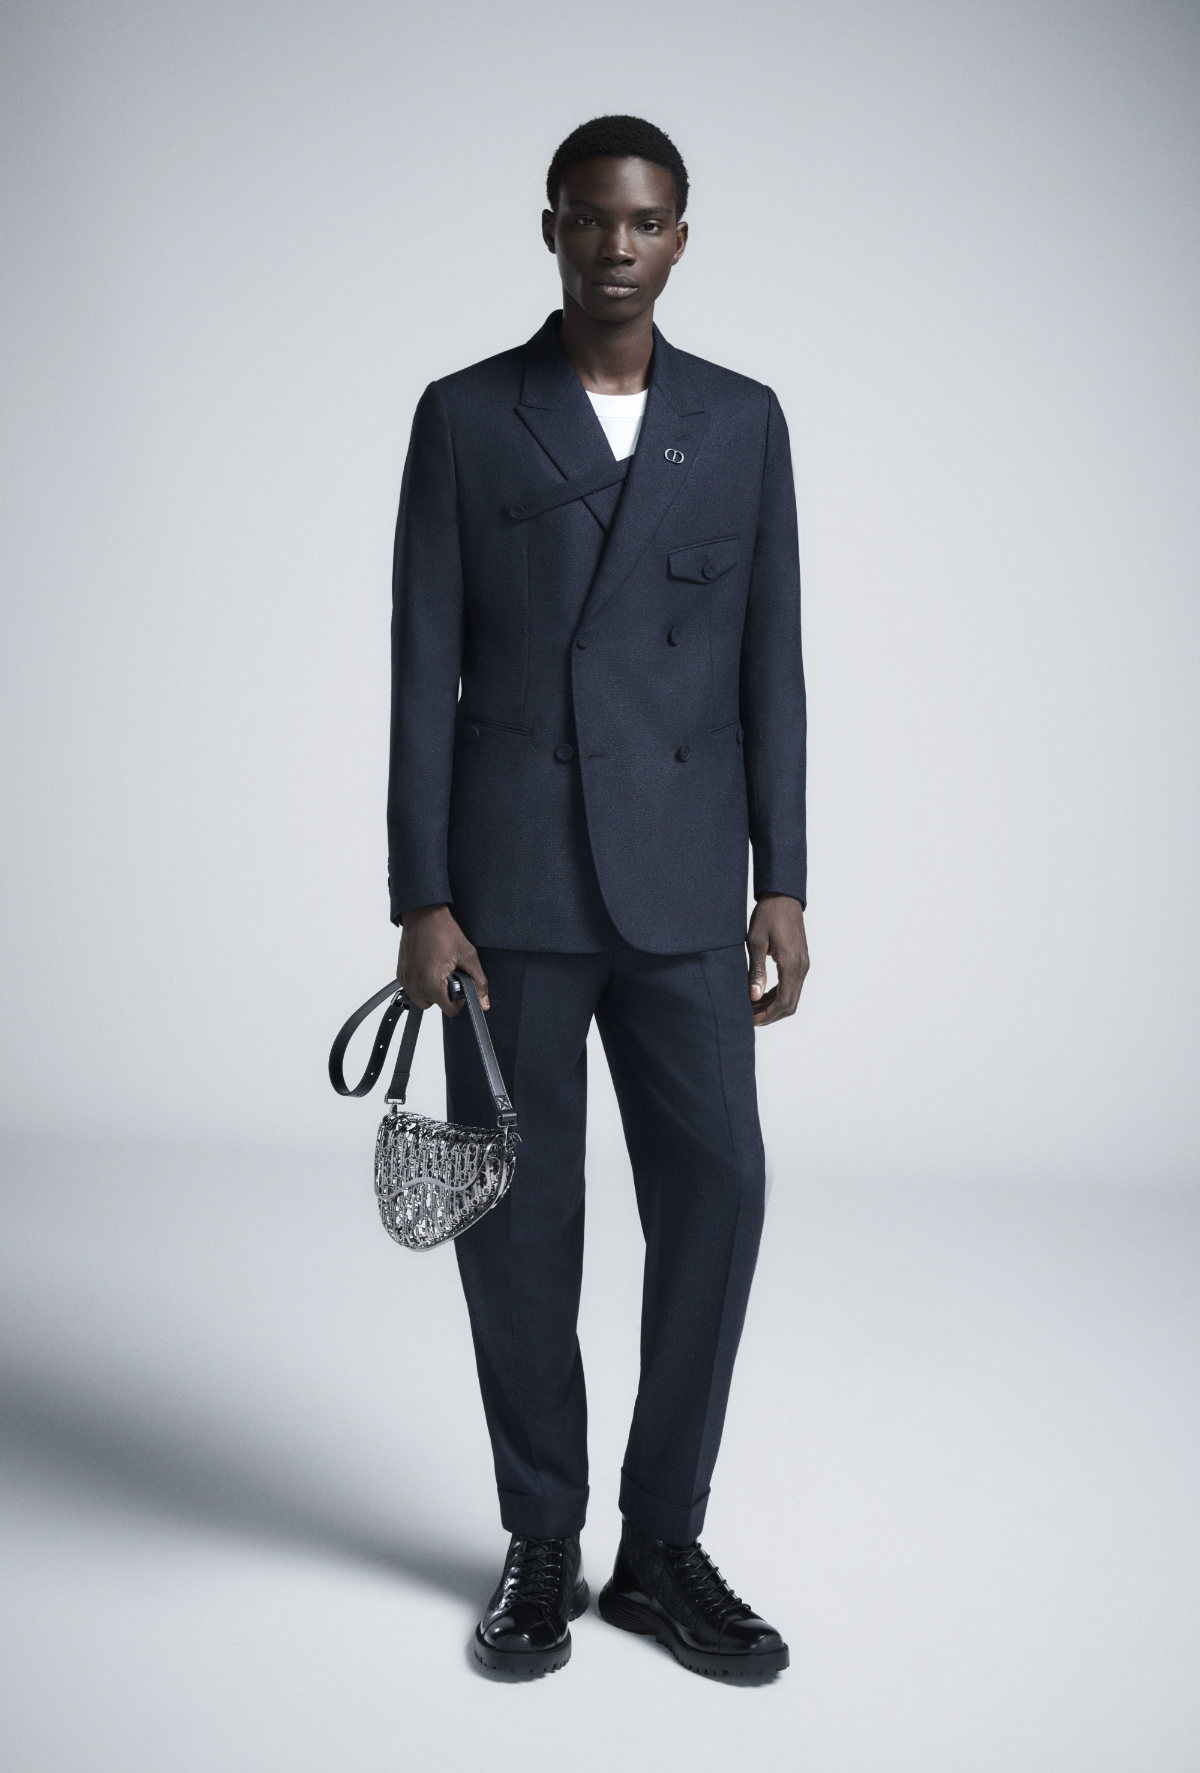 Dior Presents Its New Men's Spring 2024 Capsule Collection: Tailoring